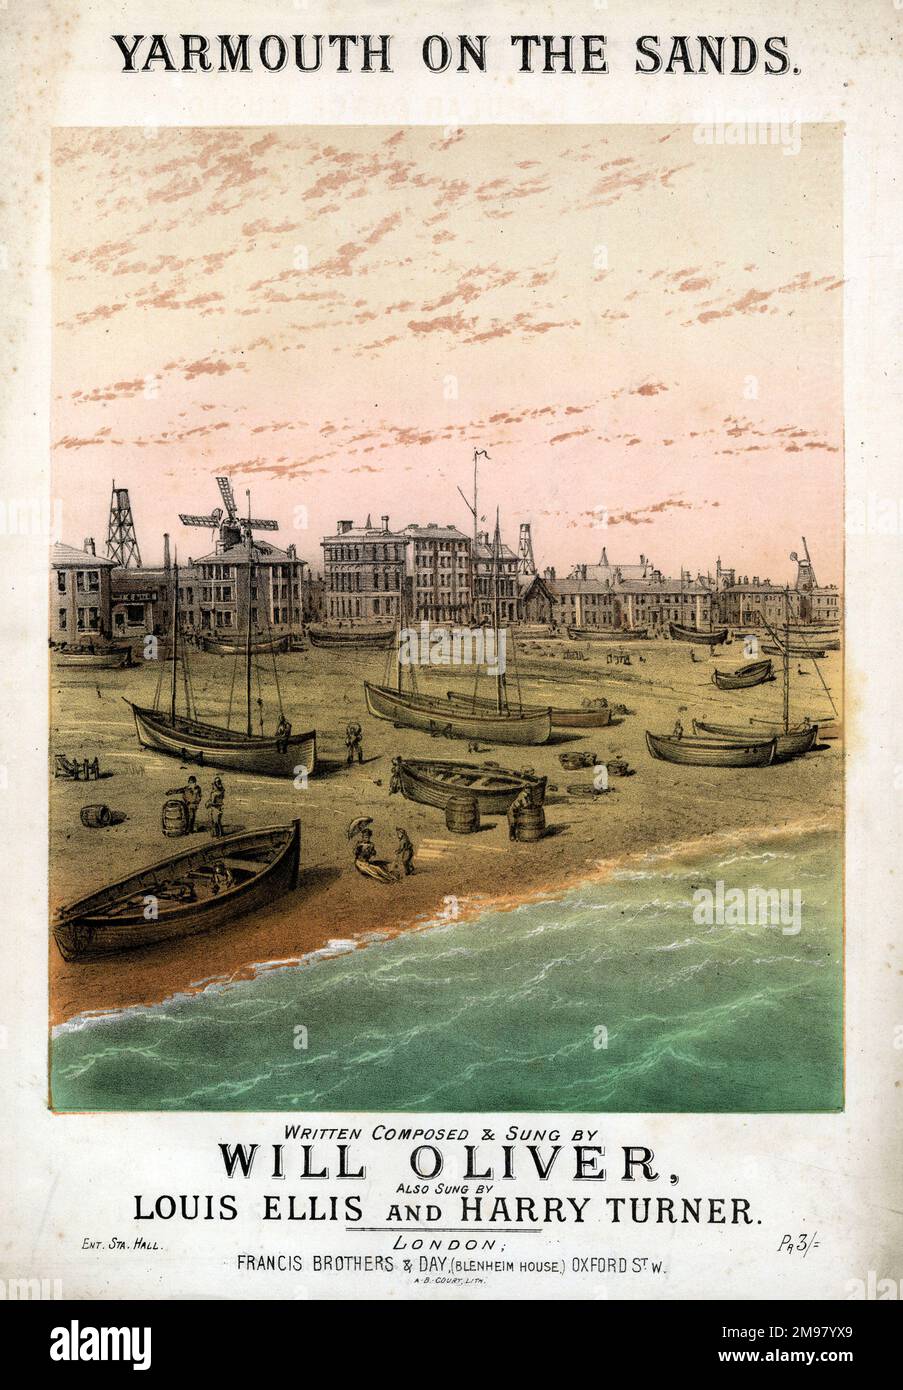 Music cover, Yarmouth on the Sands, written, composed and sung by Will Oliver, also sung by Louis Ellis and Harry Turner. Stock Photo